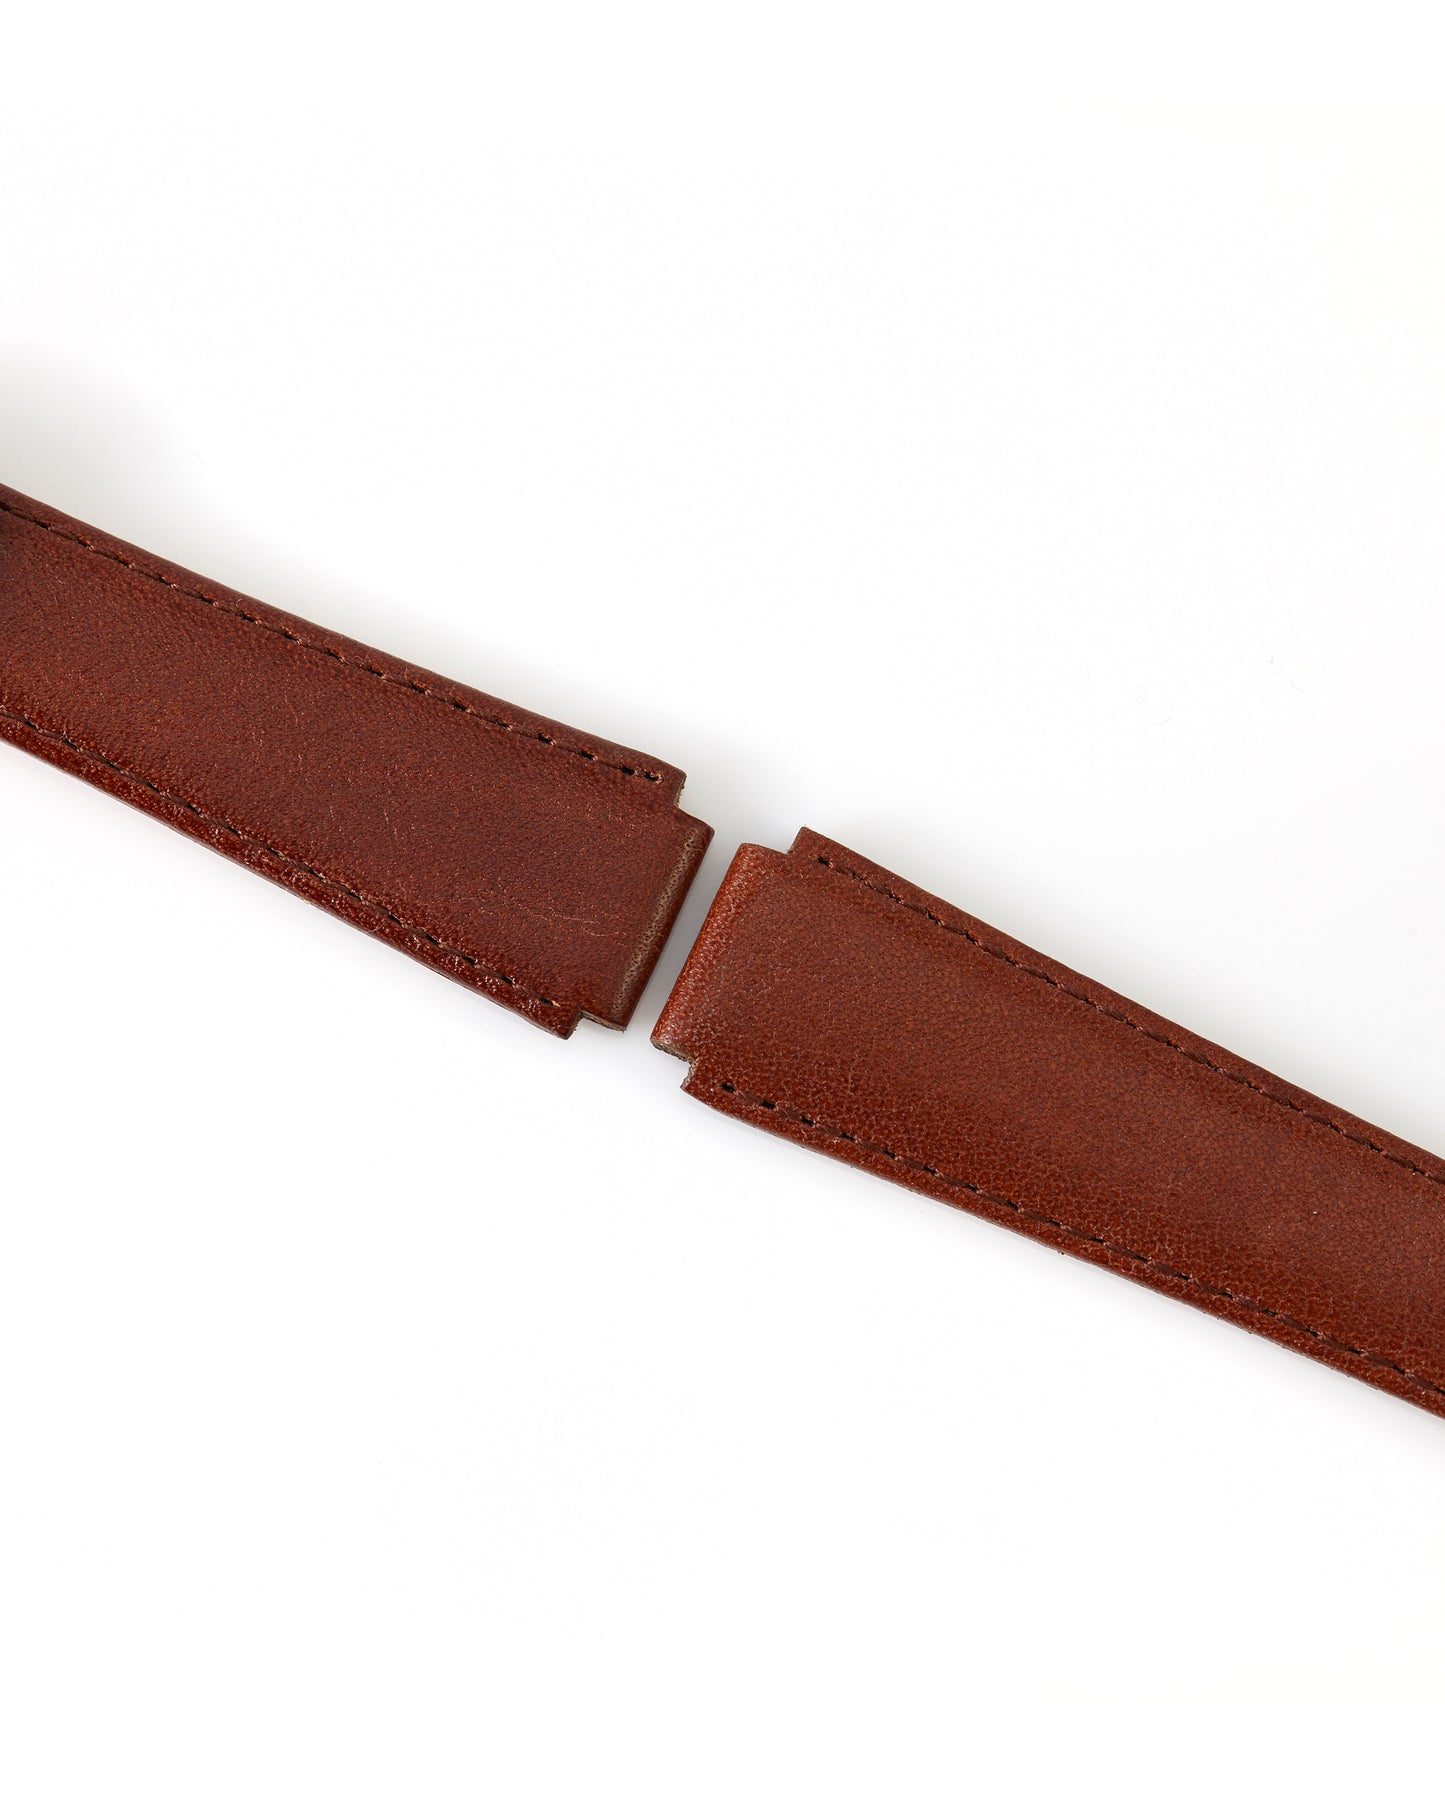 Ecclissi 14mm x 14mm Notched Brown Leather Strap 22590